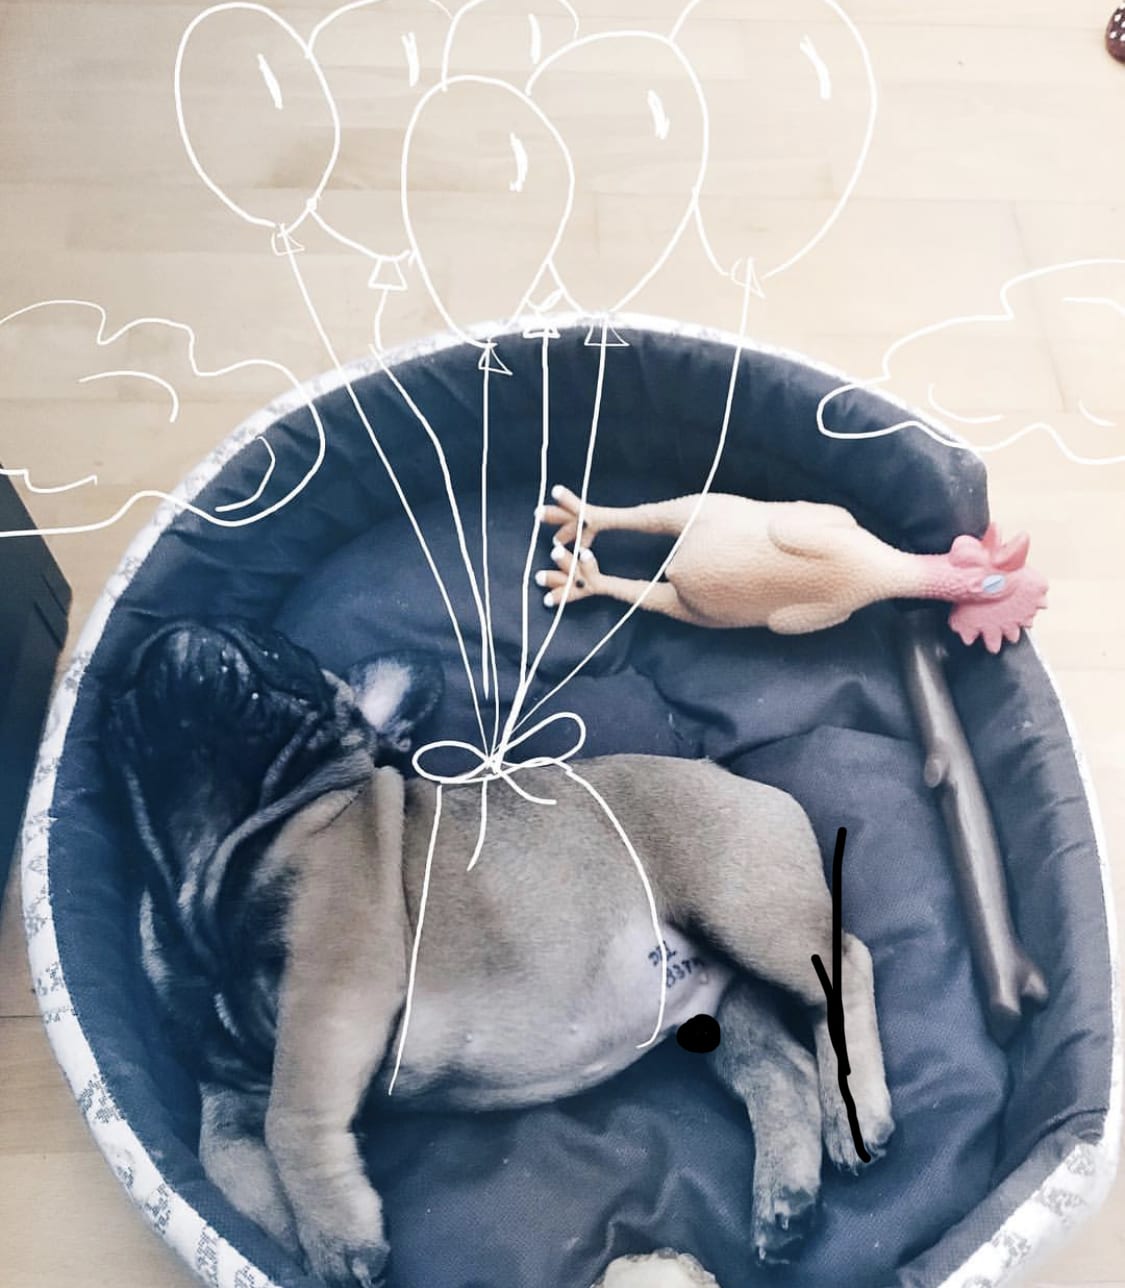 A French Bulldog sleeping on its bed photo doodled it with its body wrapped with balloon ties and with clouds beside it